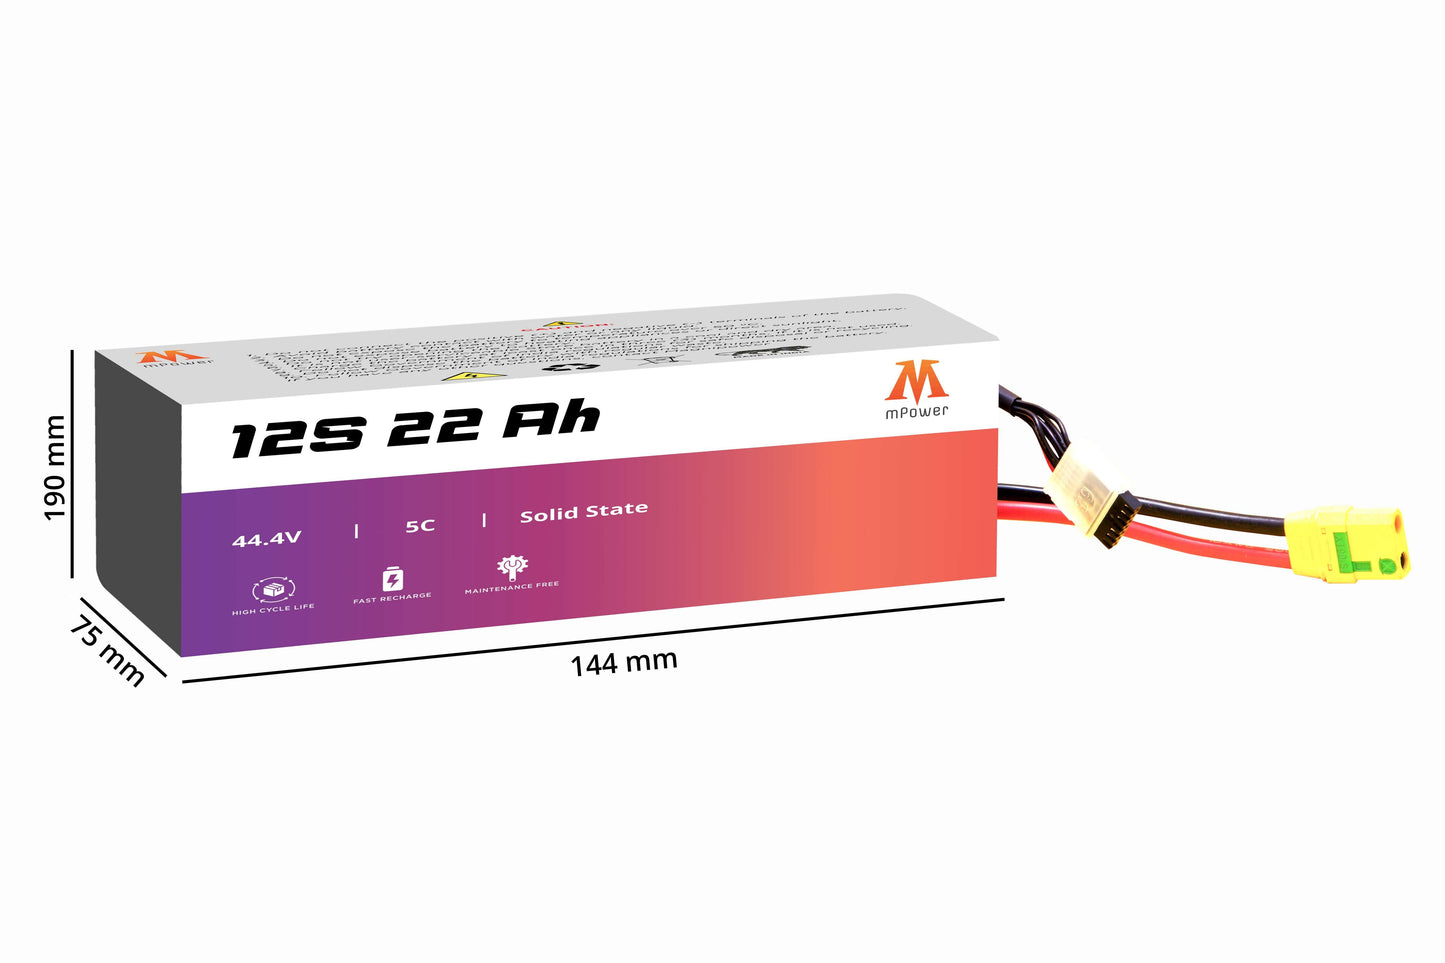 mPower 12S 22Ah Solid States Battery for Delivery Drones